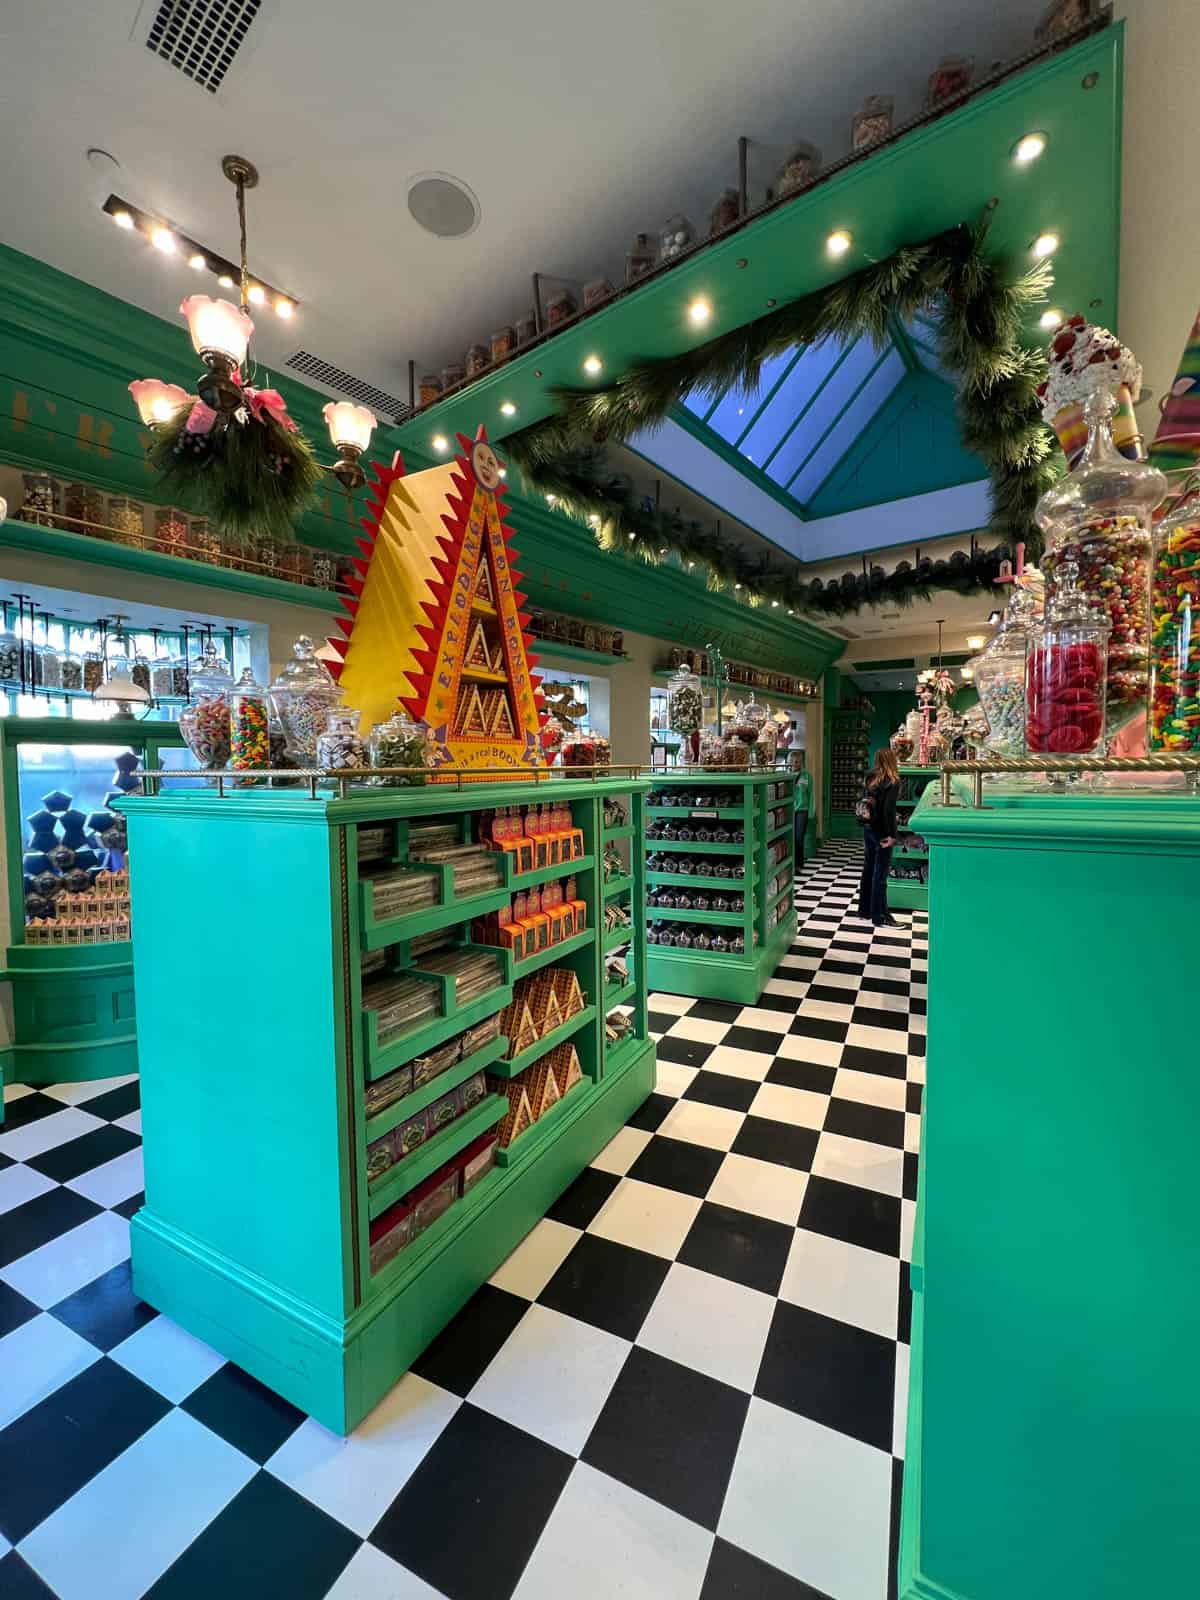 An image of the inside of Honeyduke's candy shop in Hogsmeade in the Wizarding World of Harry Potter at the Islands of Adventure Universal in Orlando.